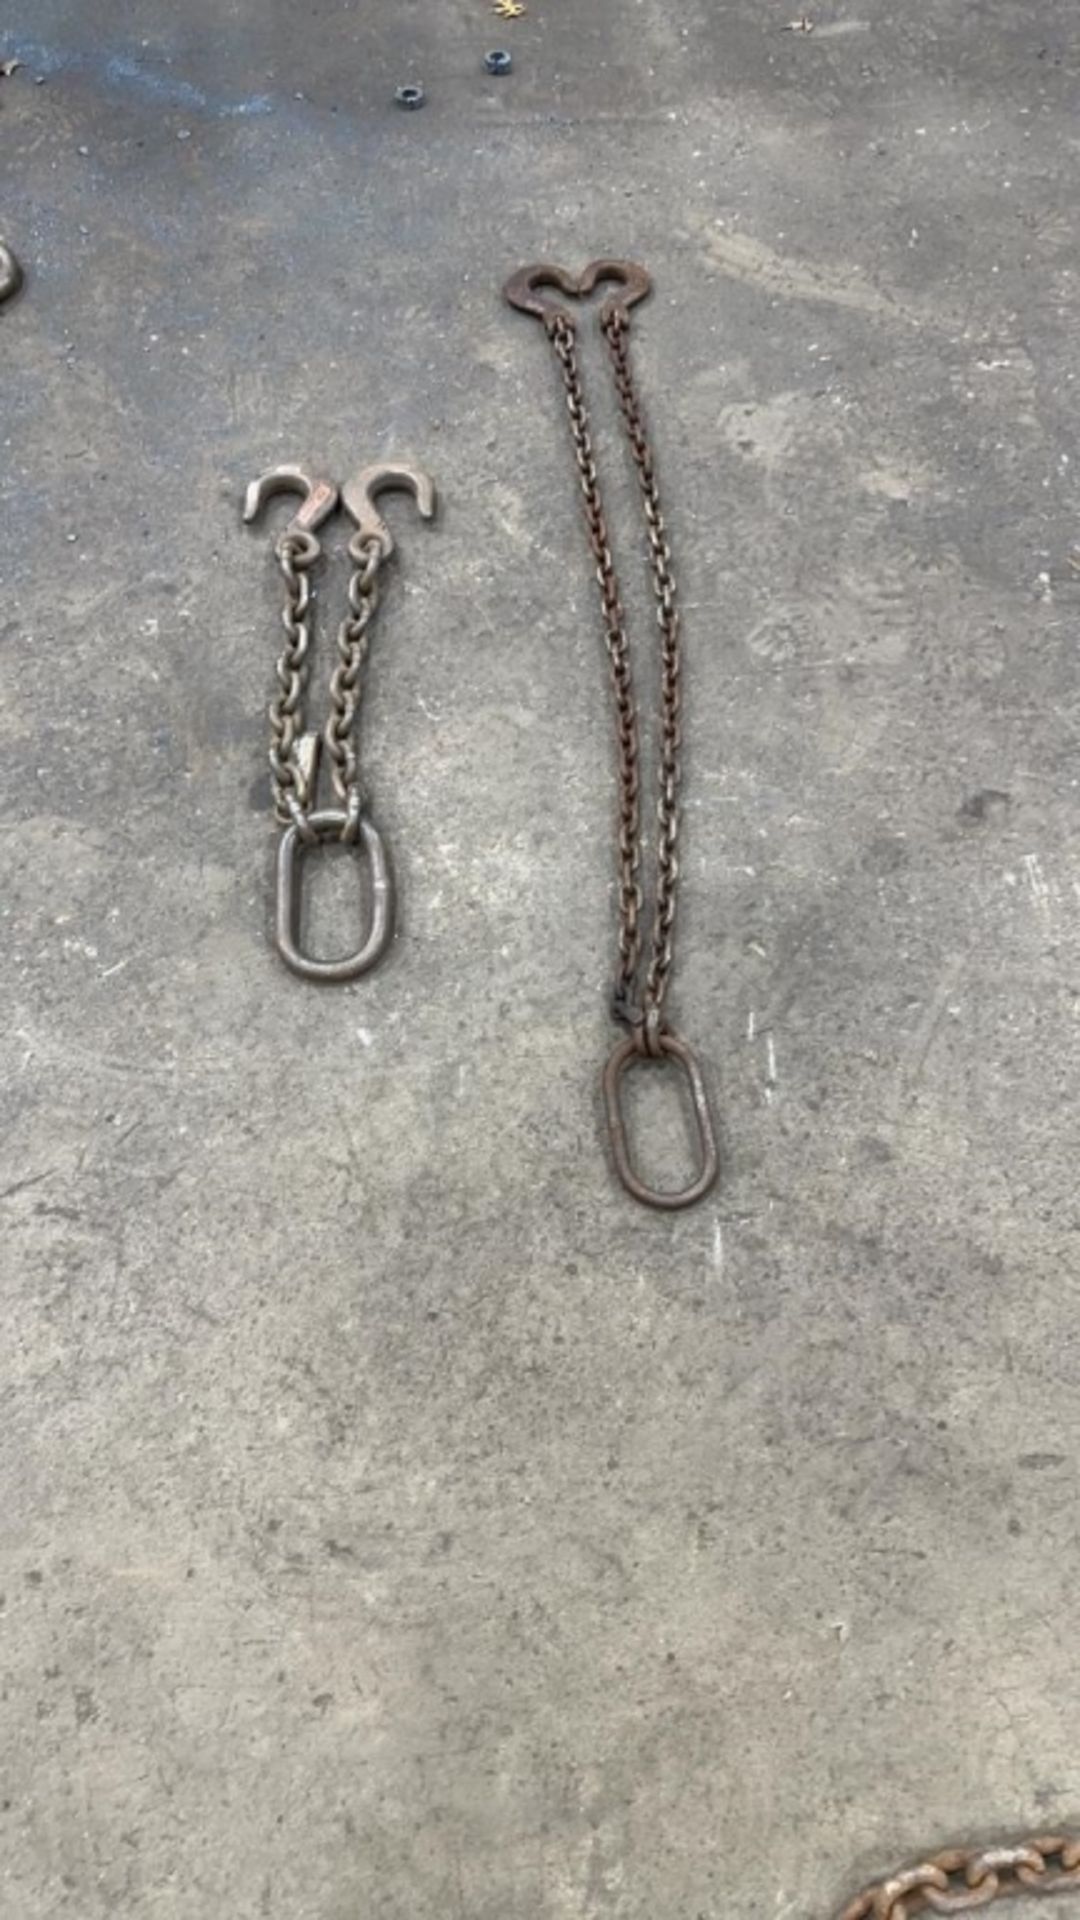 4ft & 2ft Chains on Rigging Rings with Hoist Hooks